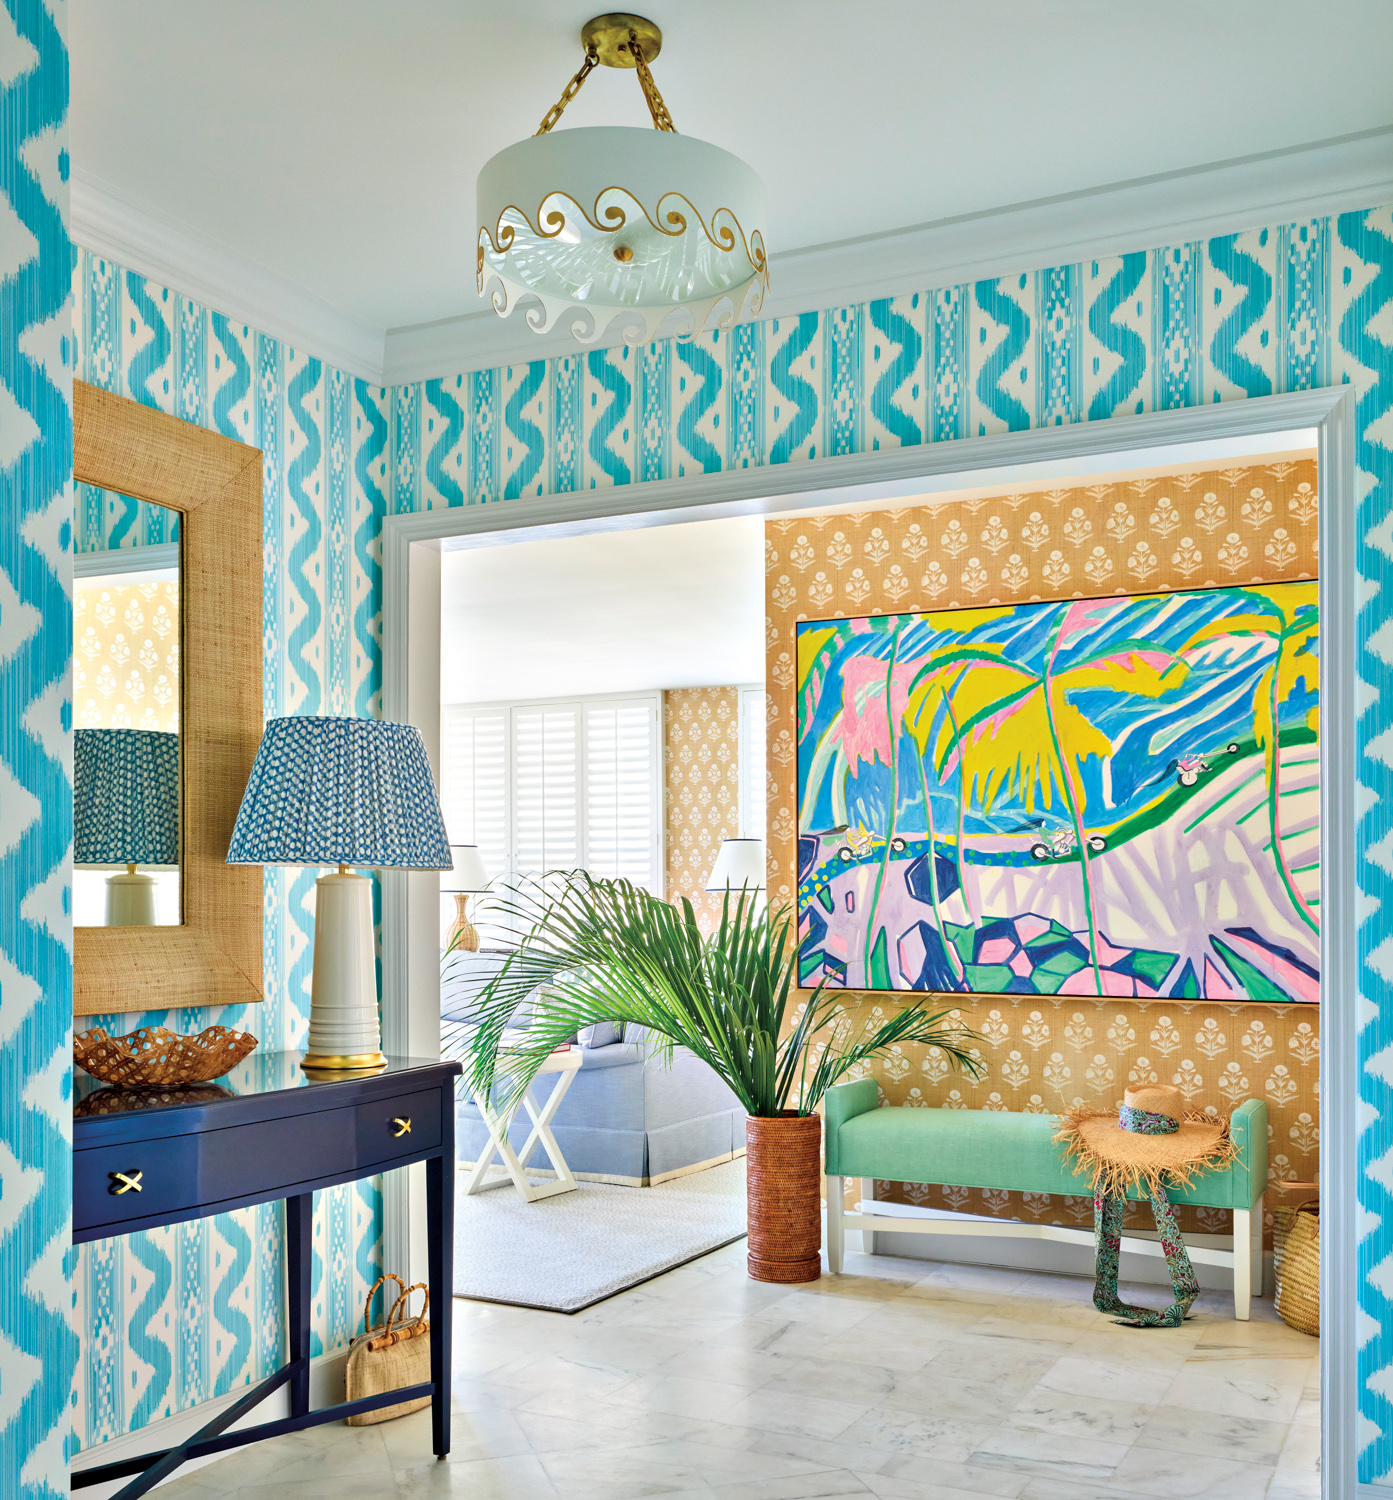 Blue-and-white geometric wallpaper in an entryway leading into a living space with Palm Beach decor by Emily Painter